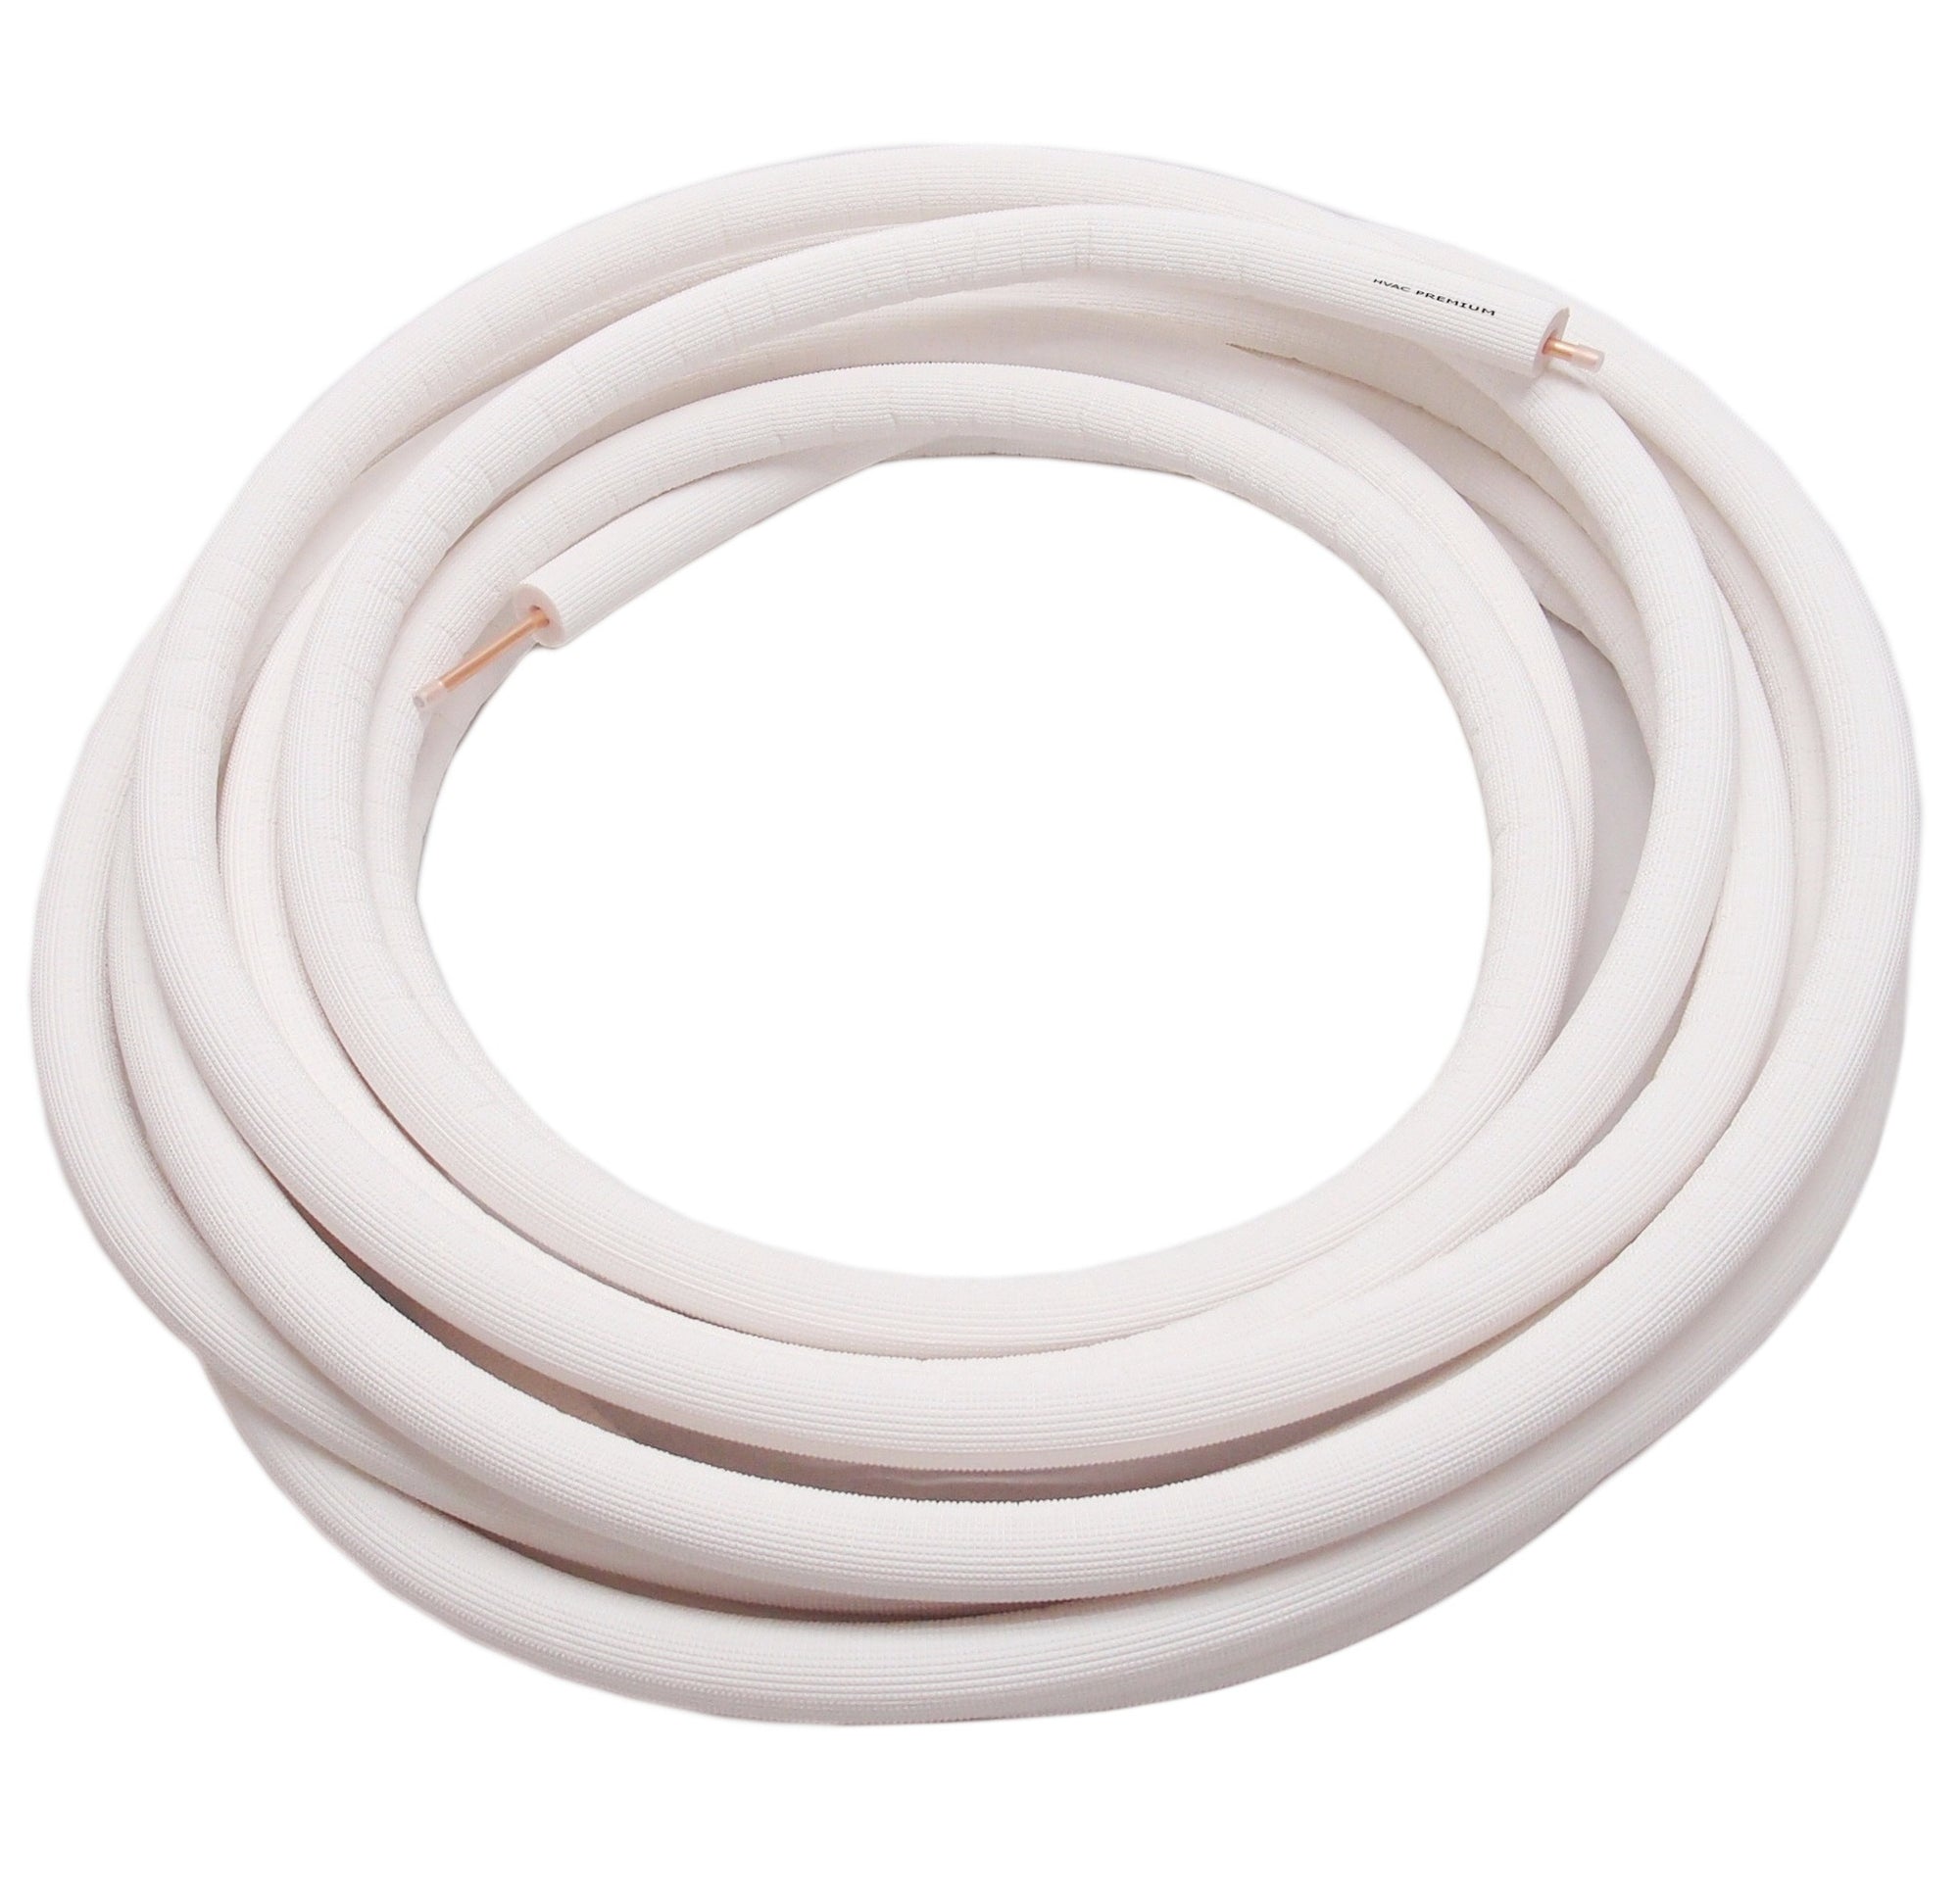 7/8" Insulated Copper Coil Line - Seamless Pipe Tube for HVAC, Refrigerant - 1/2" White Insulation - 15' Long